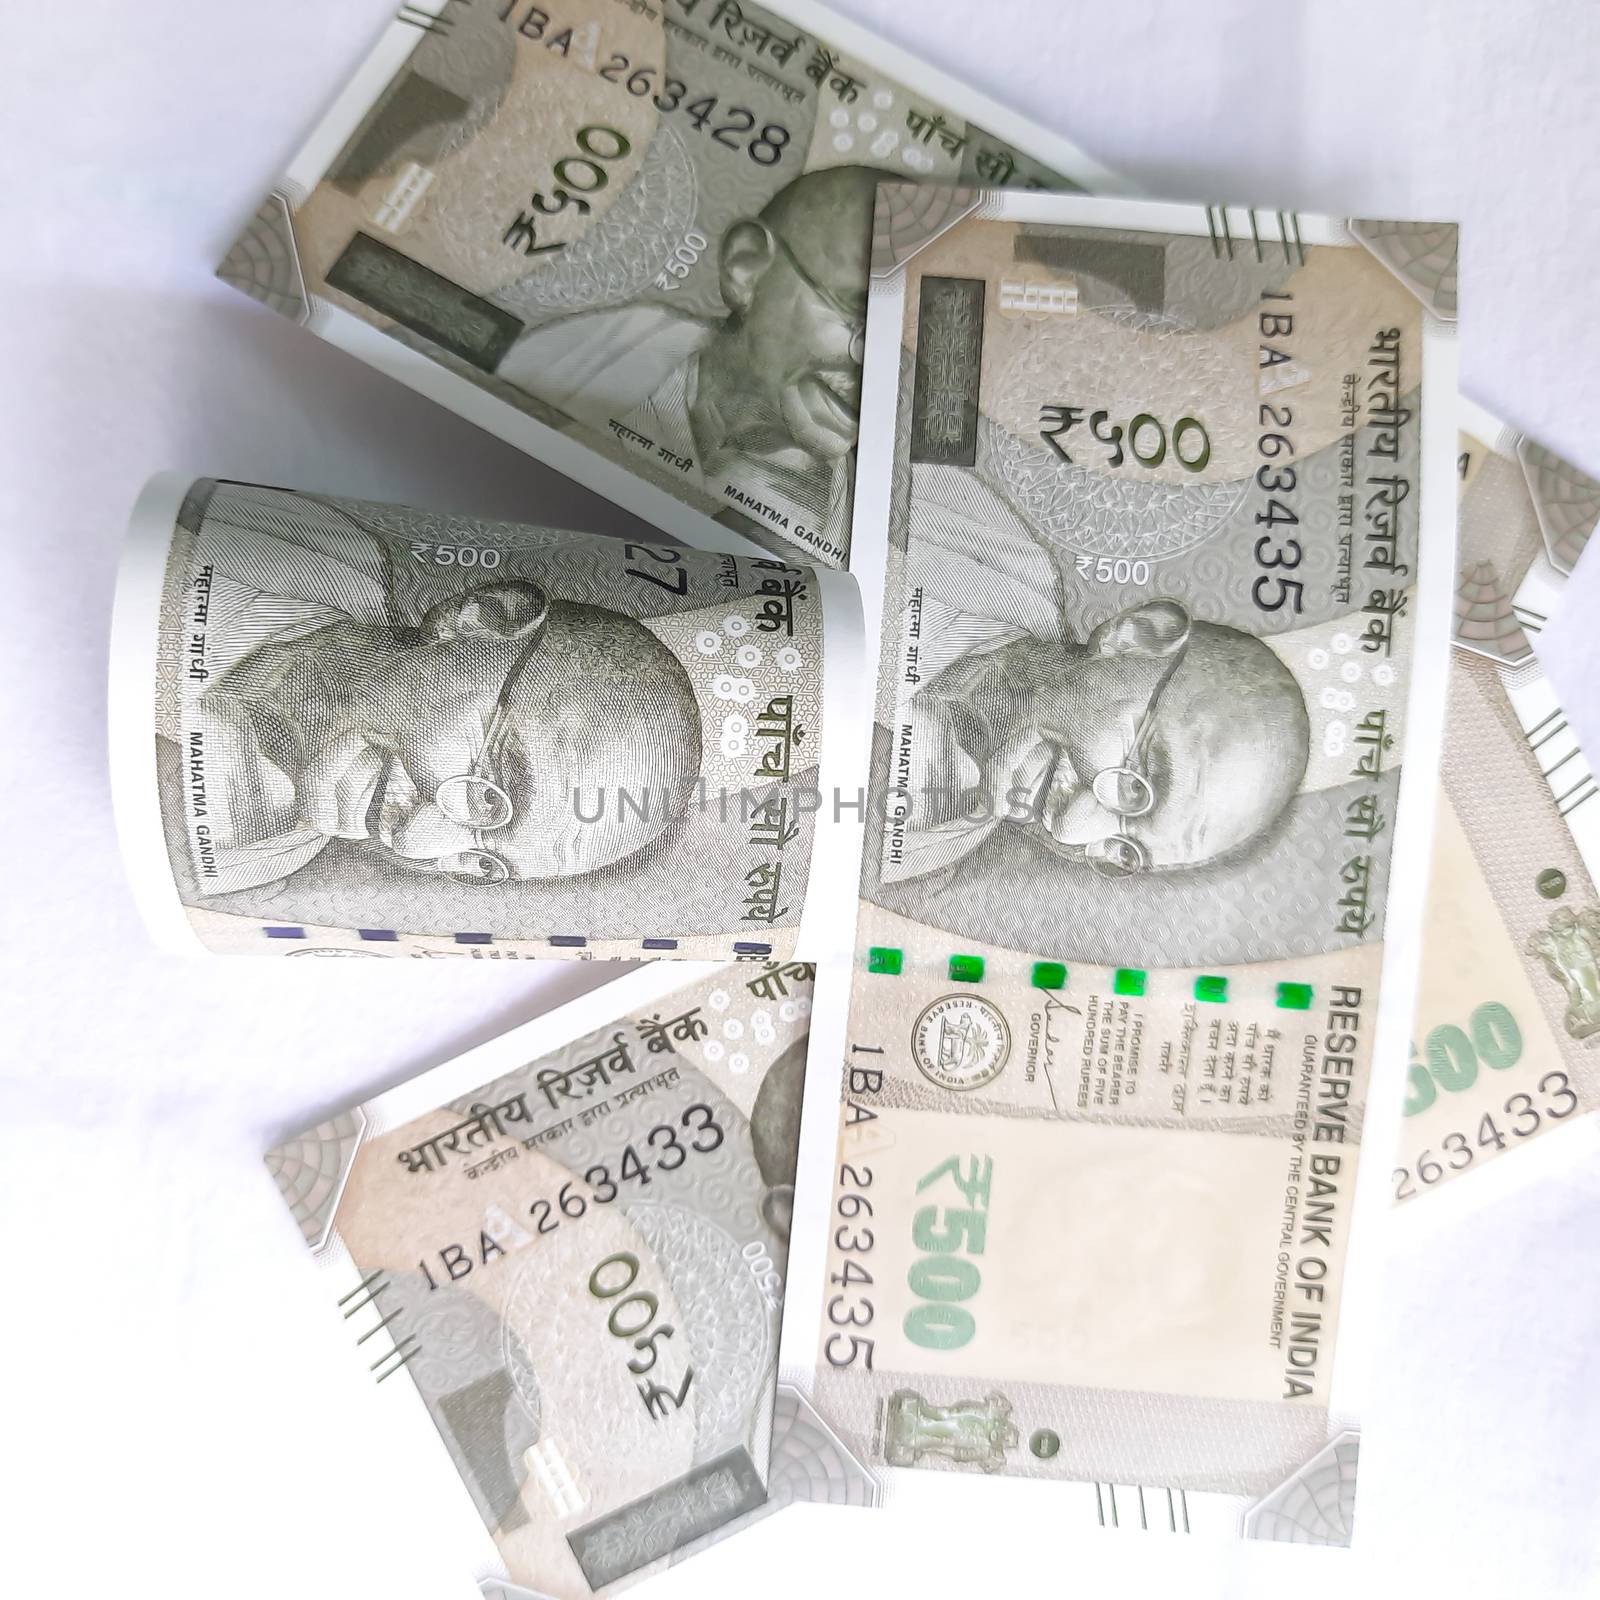 indian new currency 500 rupees with rubber band spread randomly took close view of gandhi face